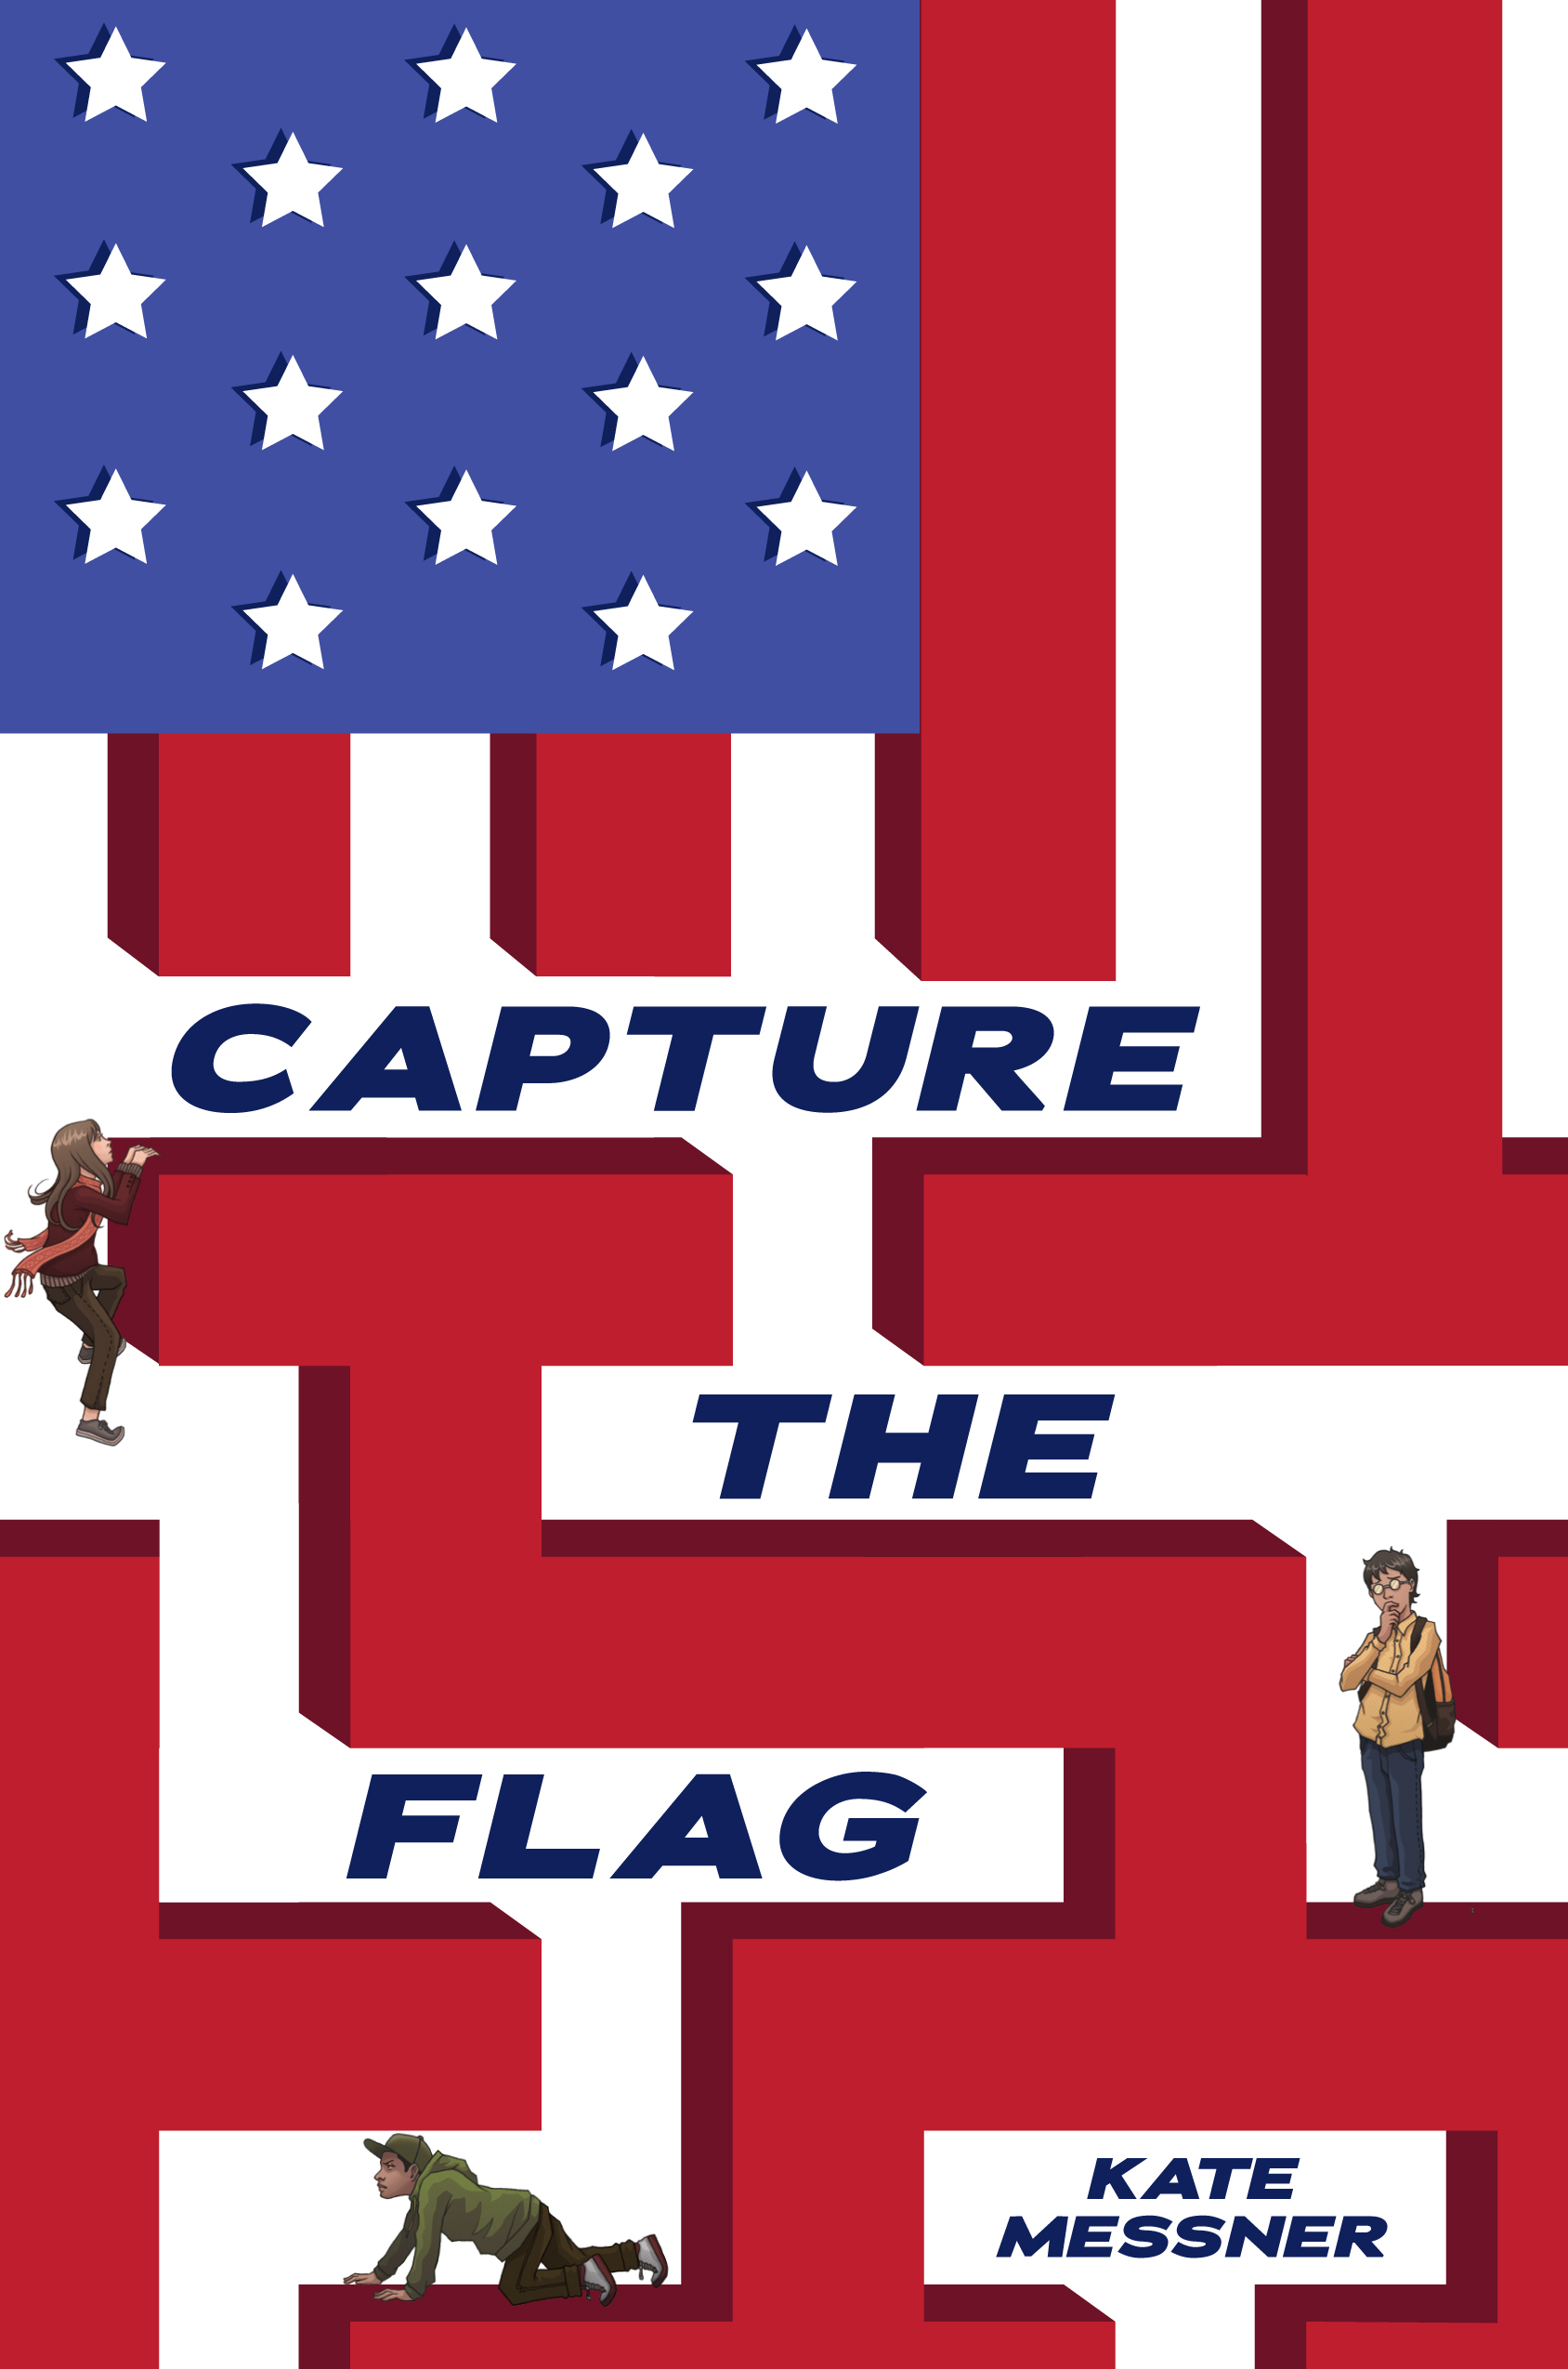 High Resolution Wallpaper | Capture The Flag 1688x2550 px